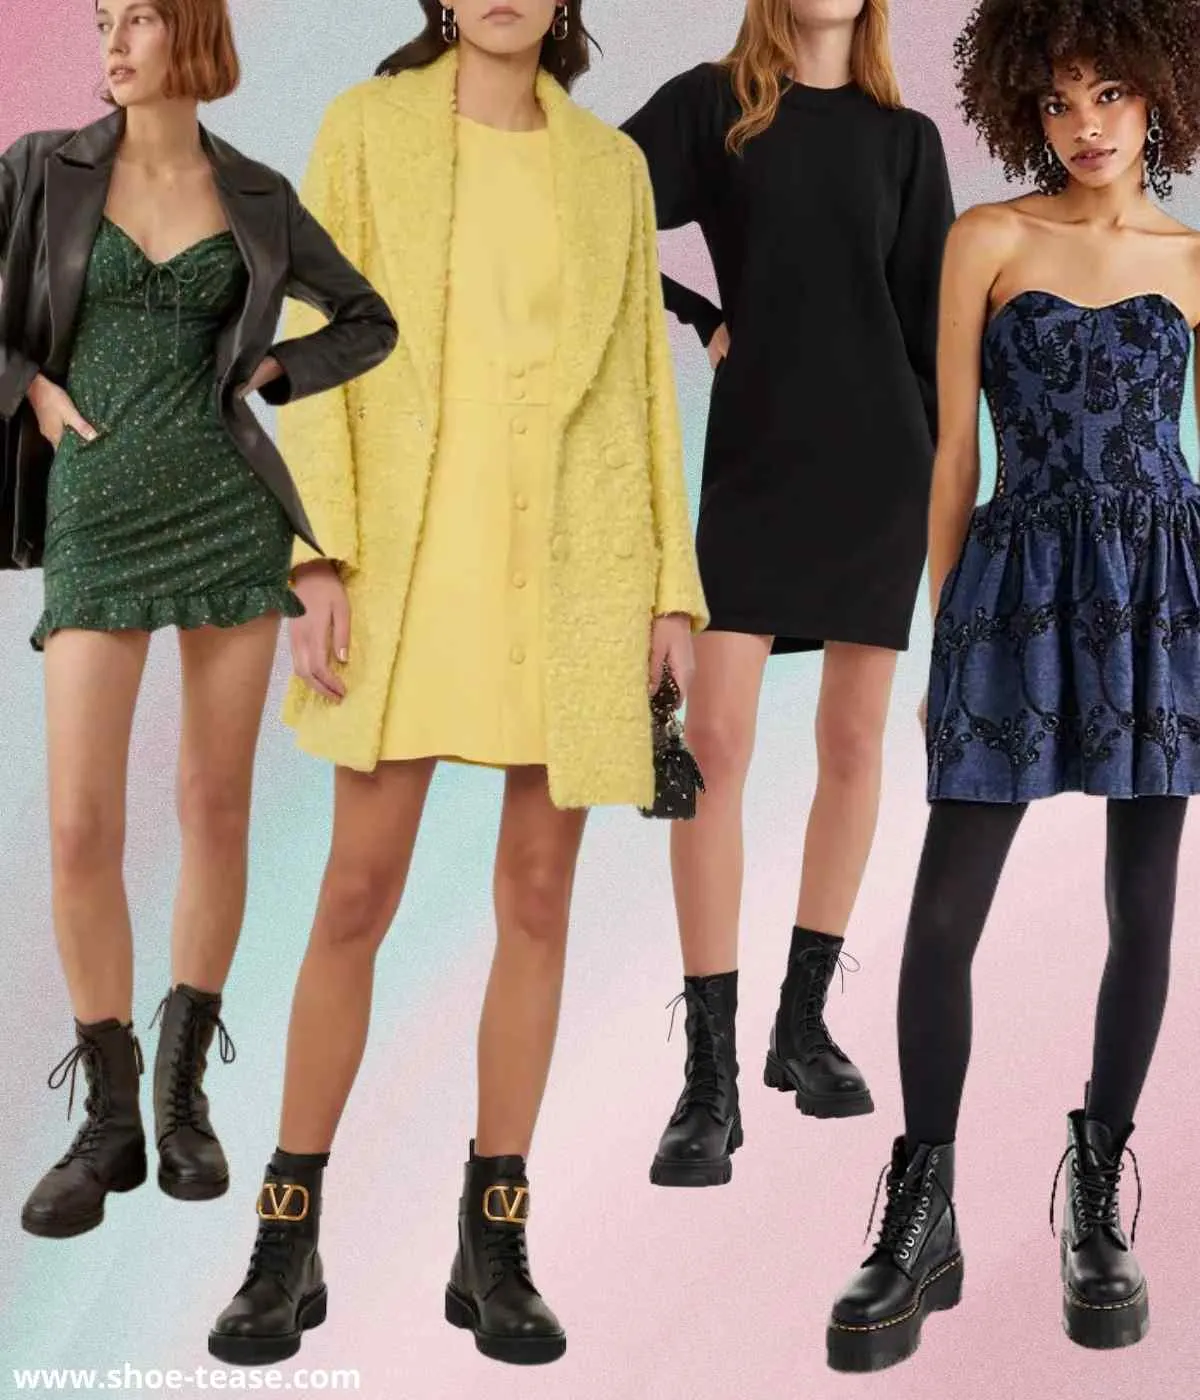 4 women wearing mini dresses with combat boots.